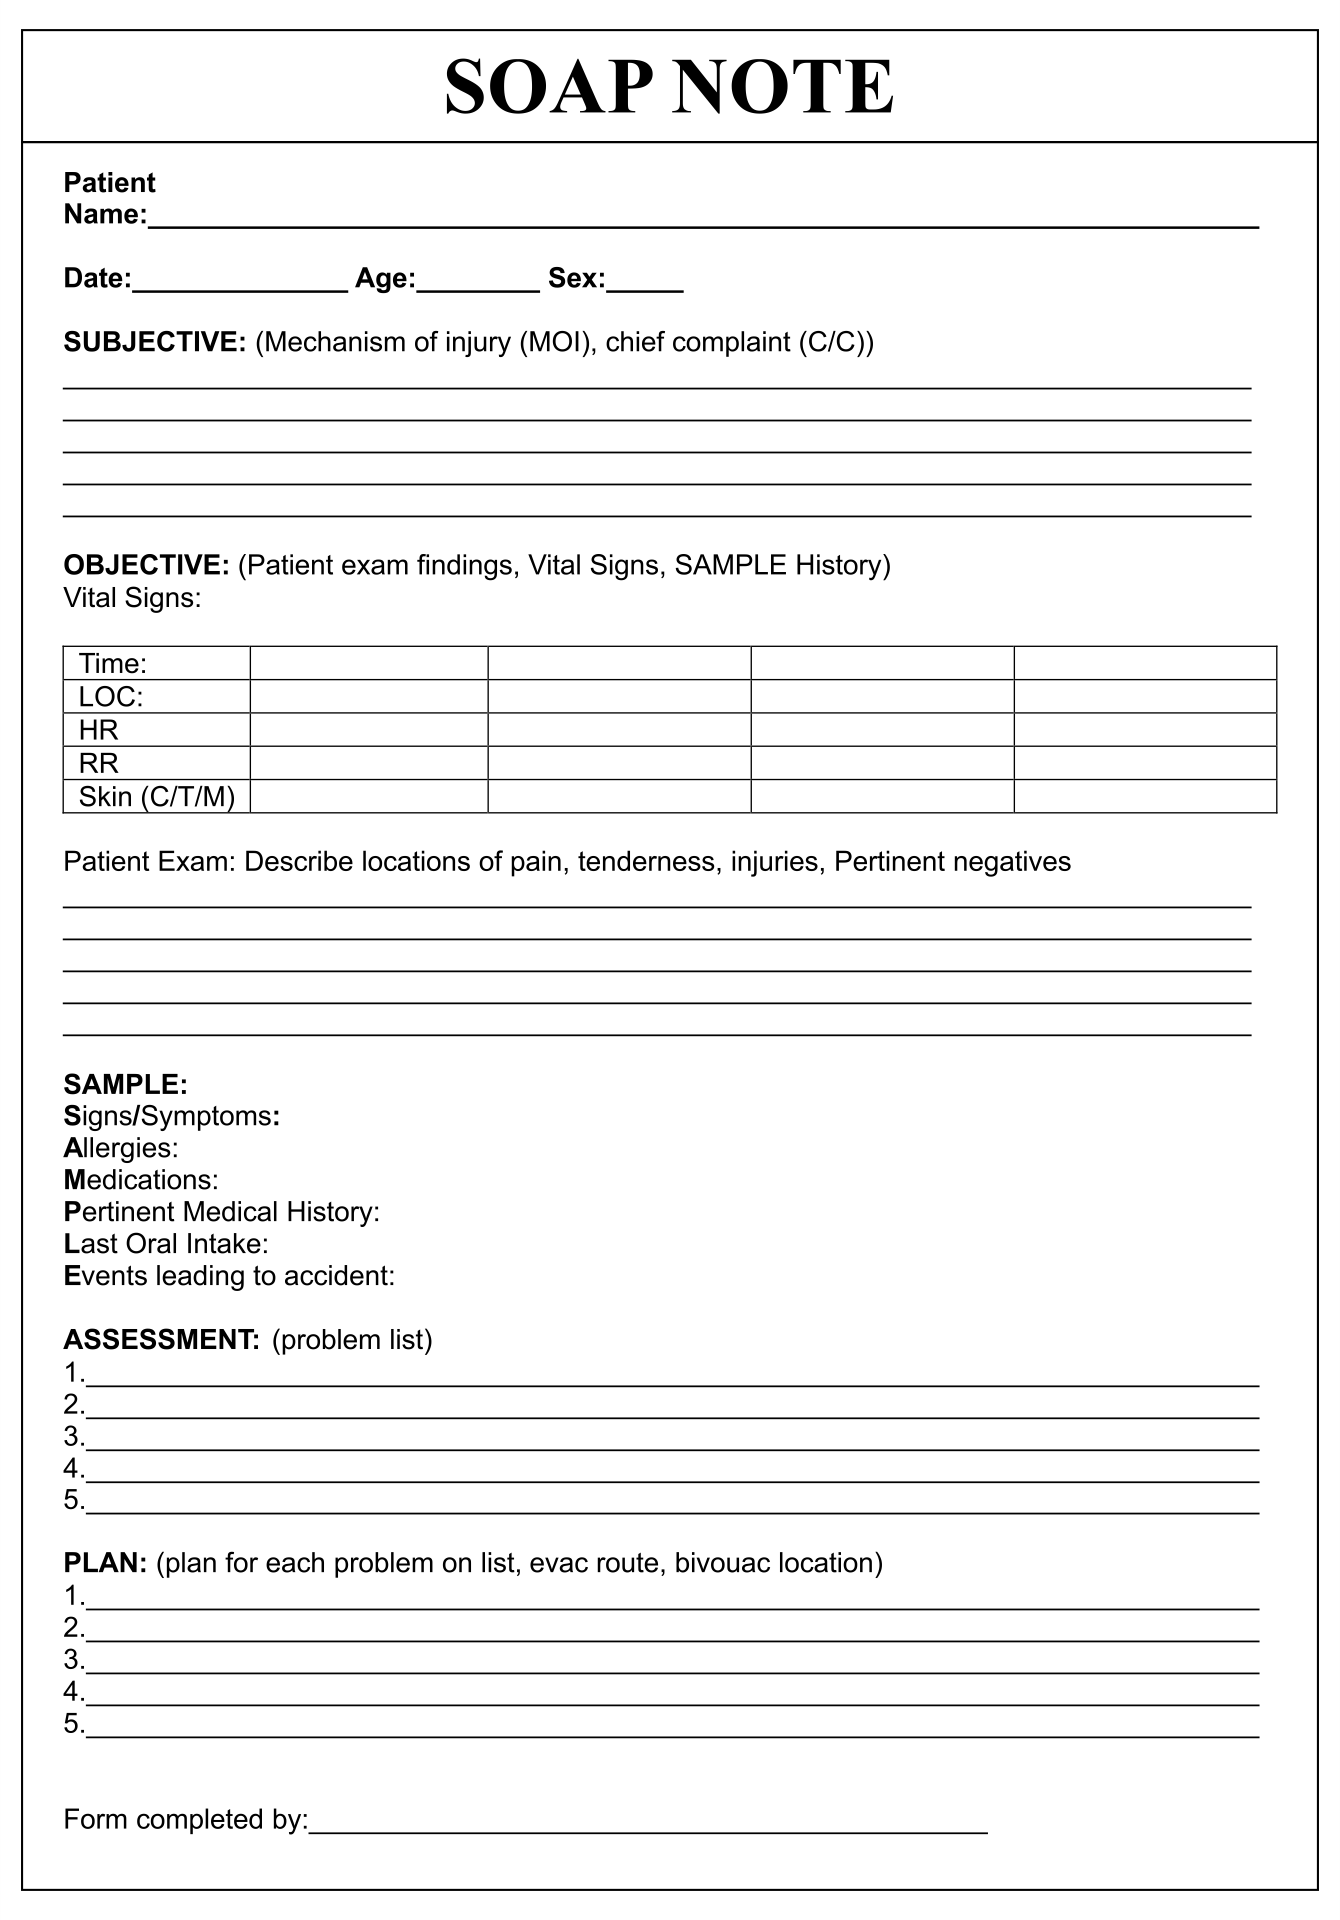 20 Best Printable Counseling Soap Note Templates - printablee.com Throughout Patient Progress Notes Template Word